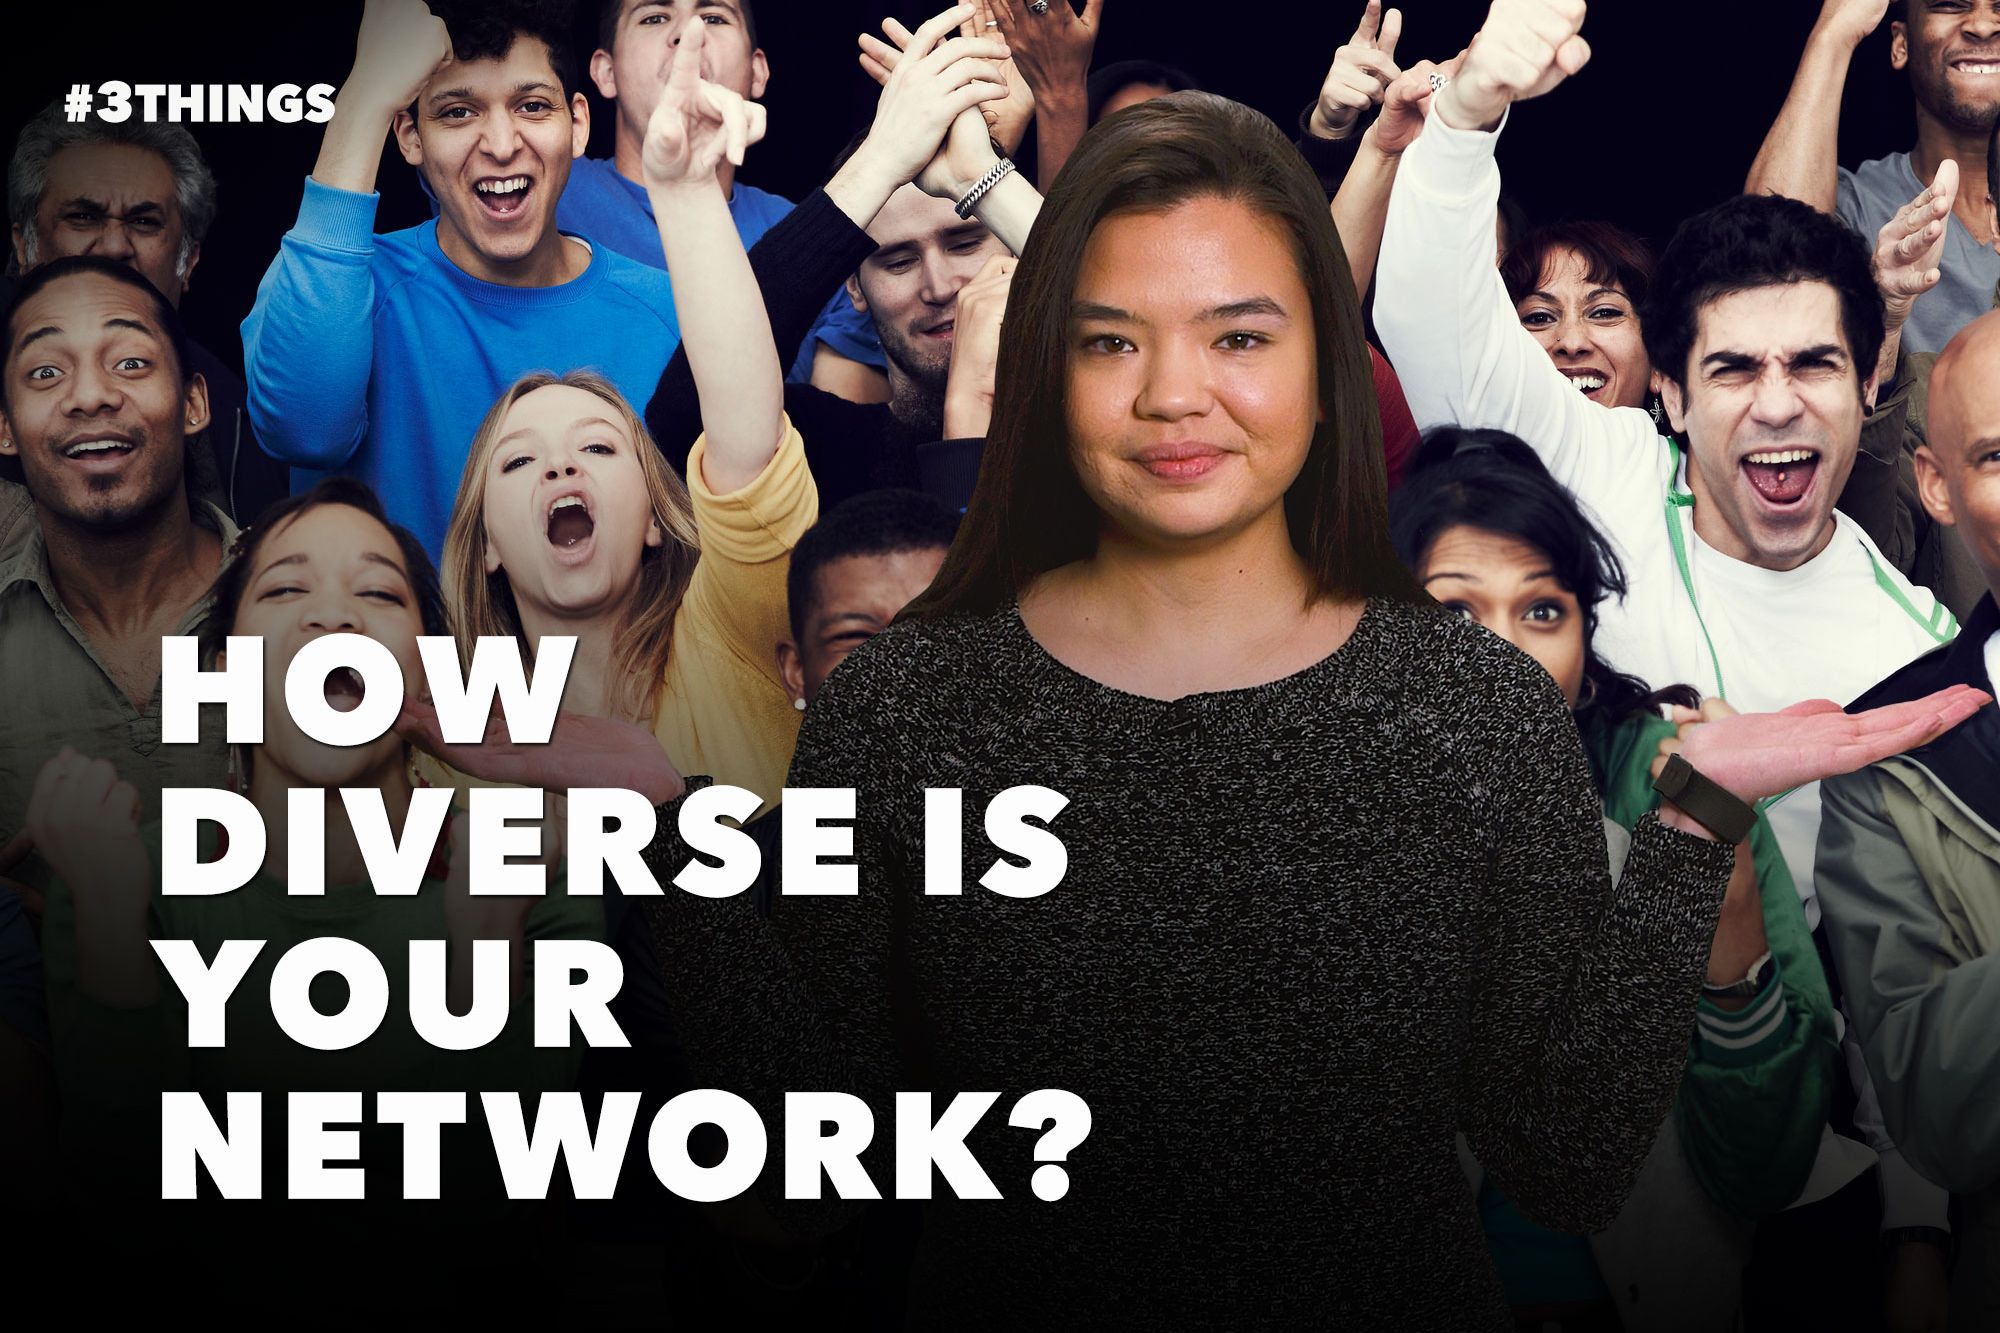 3 Ways to Diversify Your Network